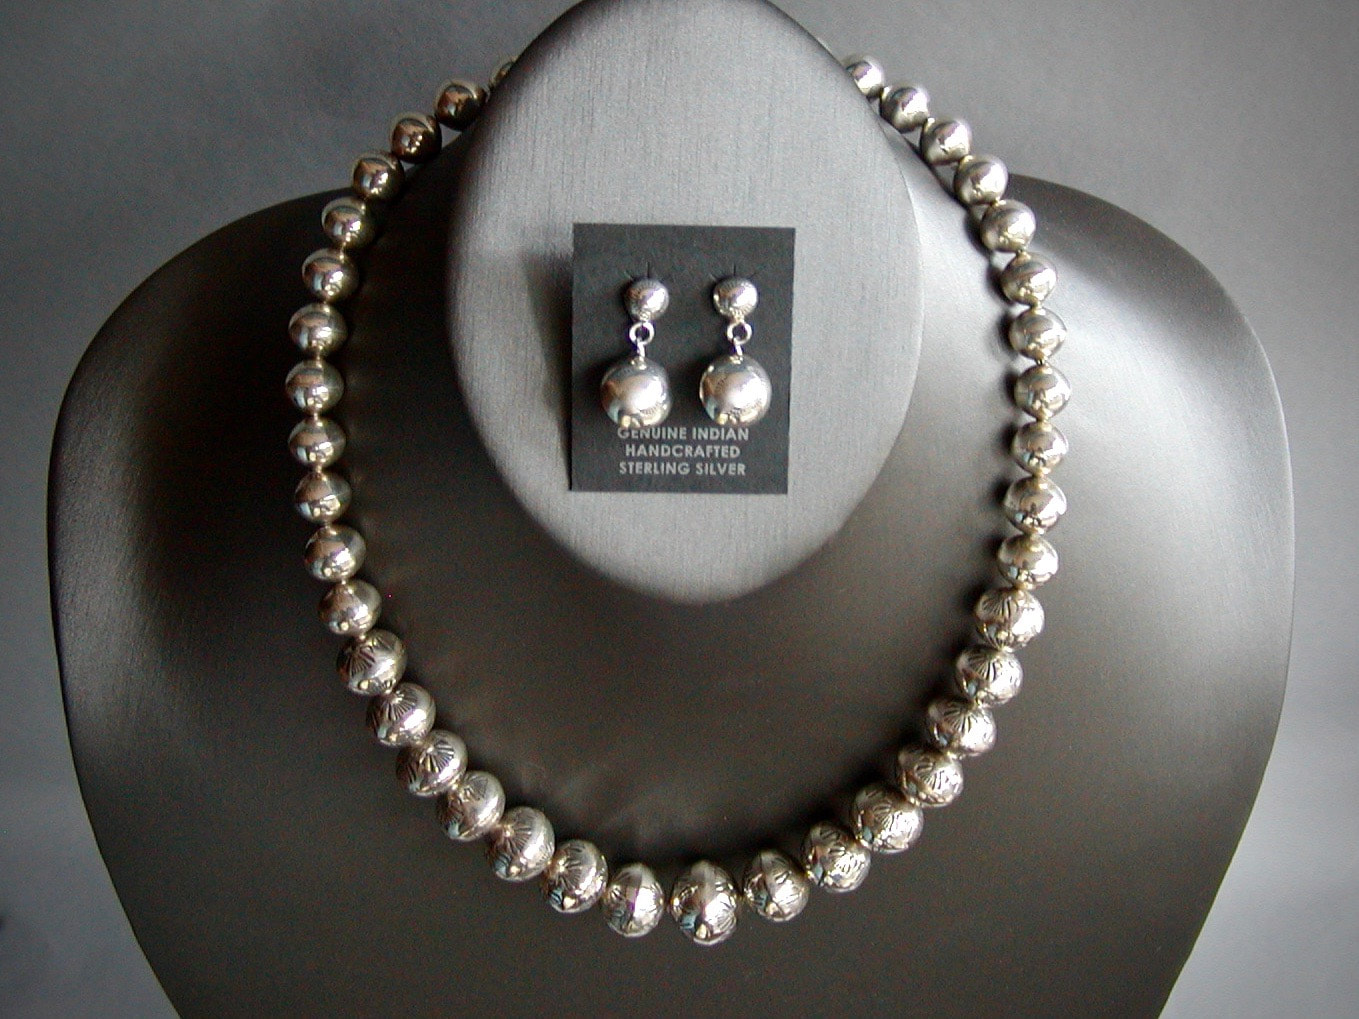 Sterling Silver Stamped Beaded Necklace with Earrings